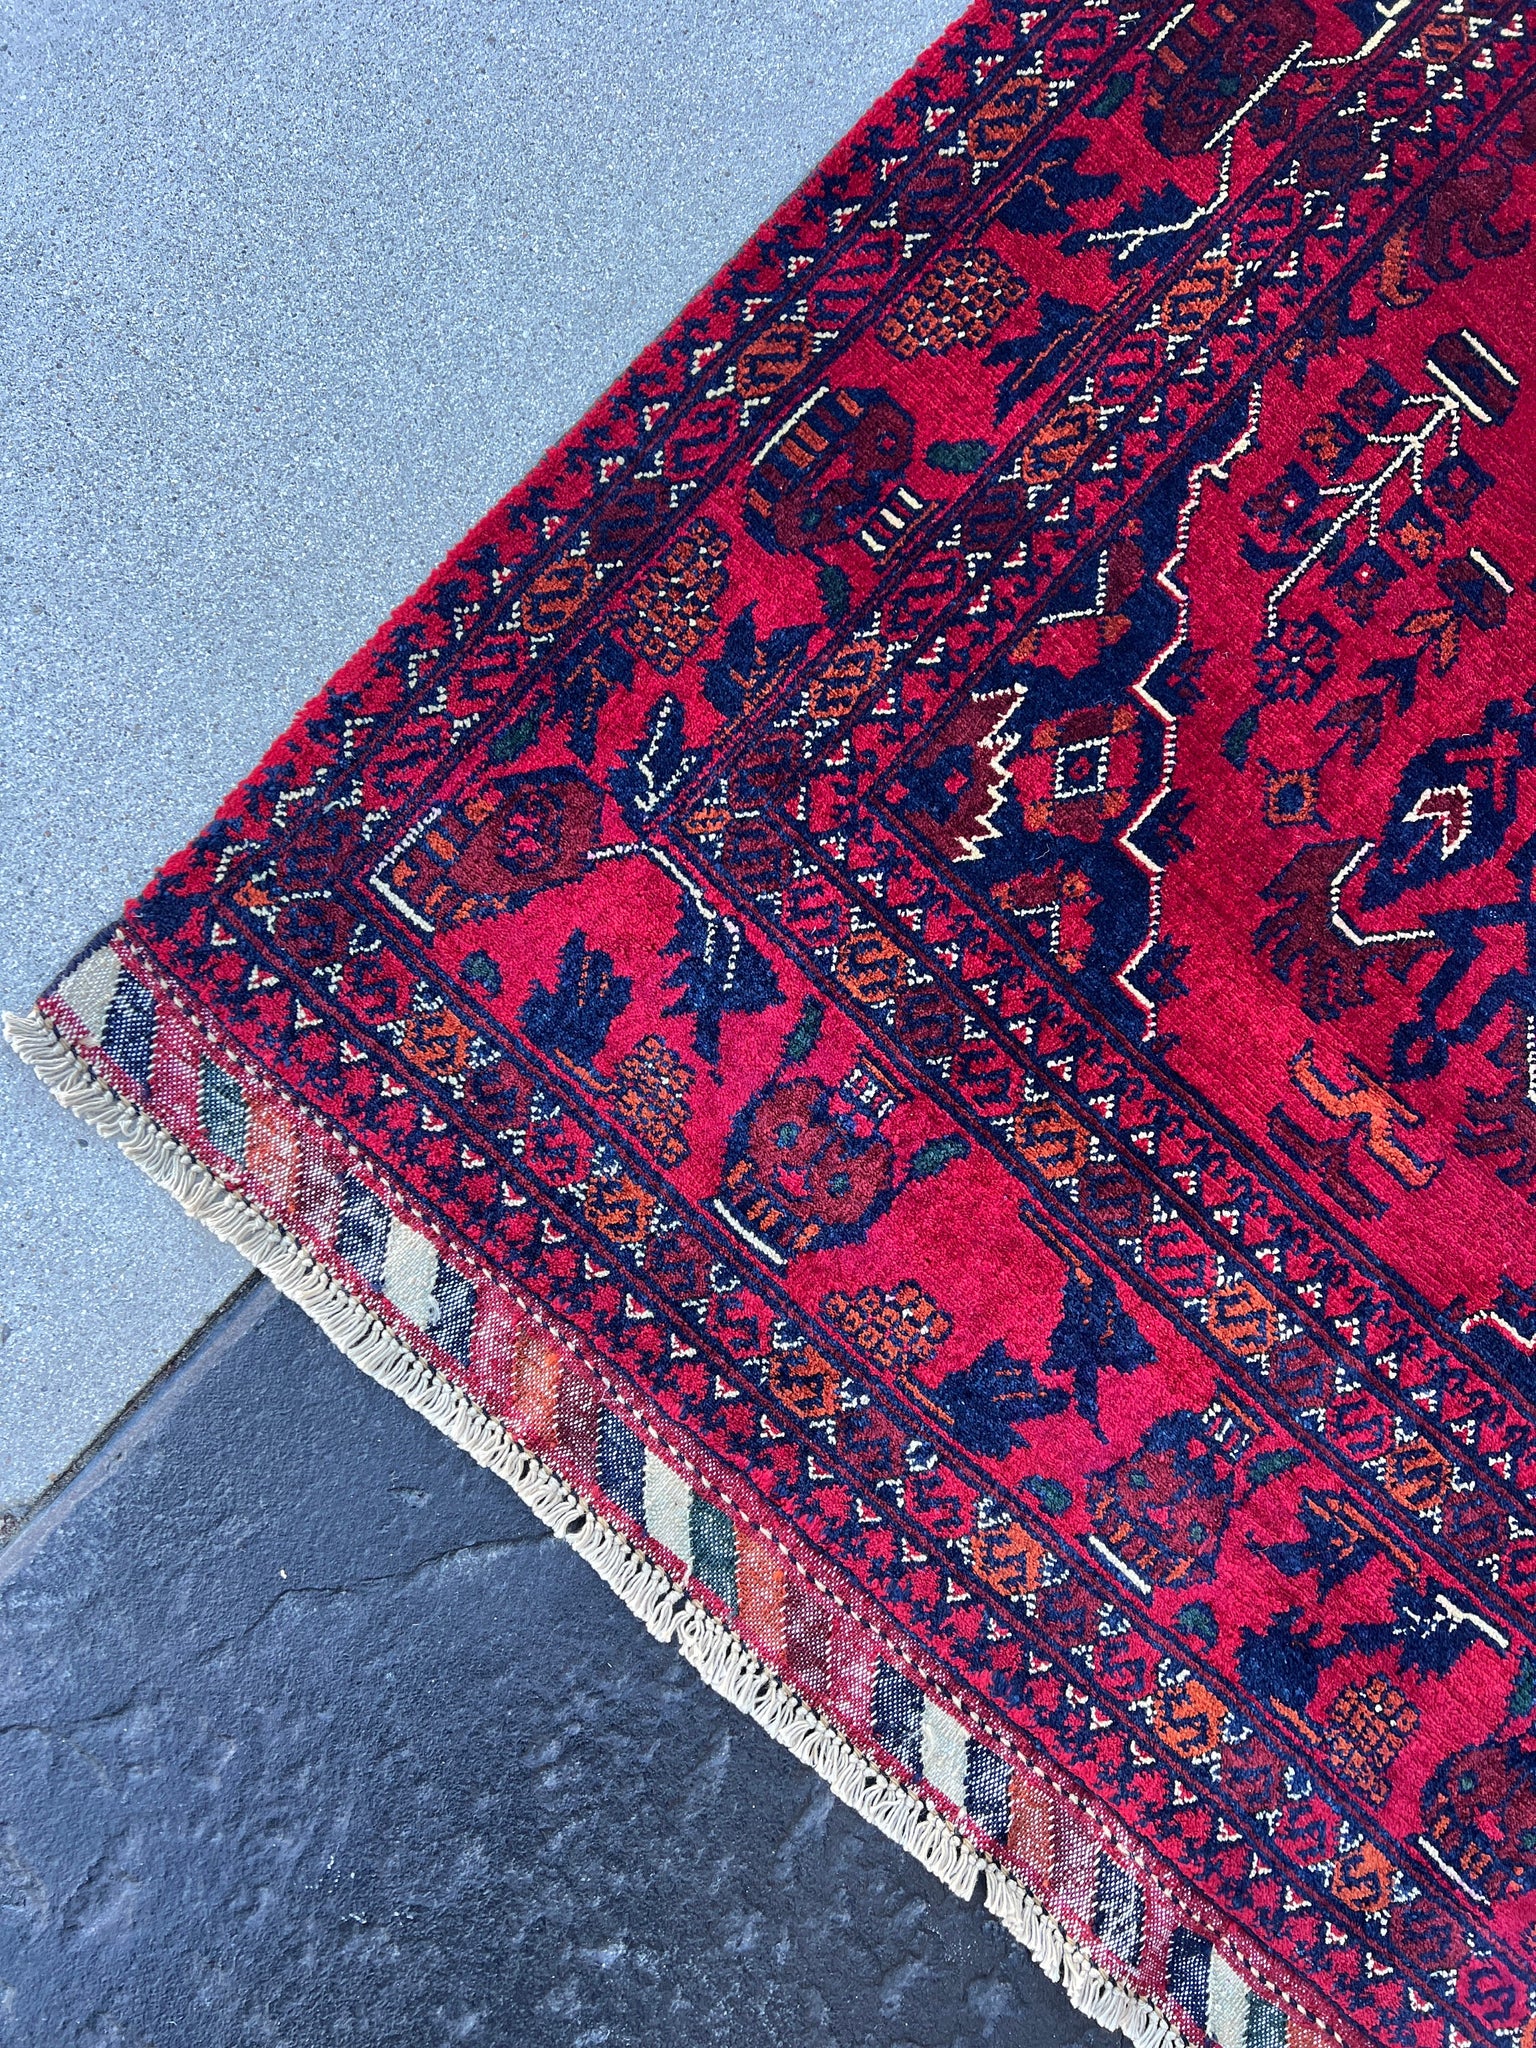 5x7 (150x215) Fair Trade Handmade Afghan Rug | Cherry Red Burnt Orange Black Crimson Red Ivory Teal Midnight Blue | Hand Knotted Floral Wool